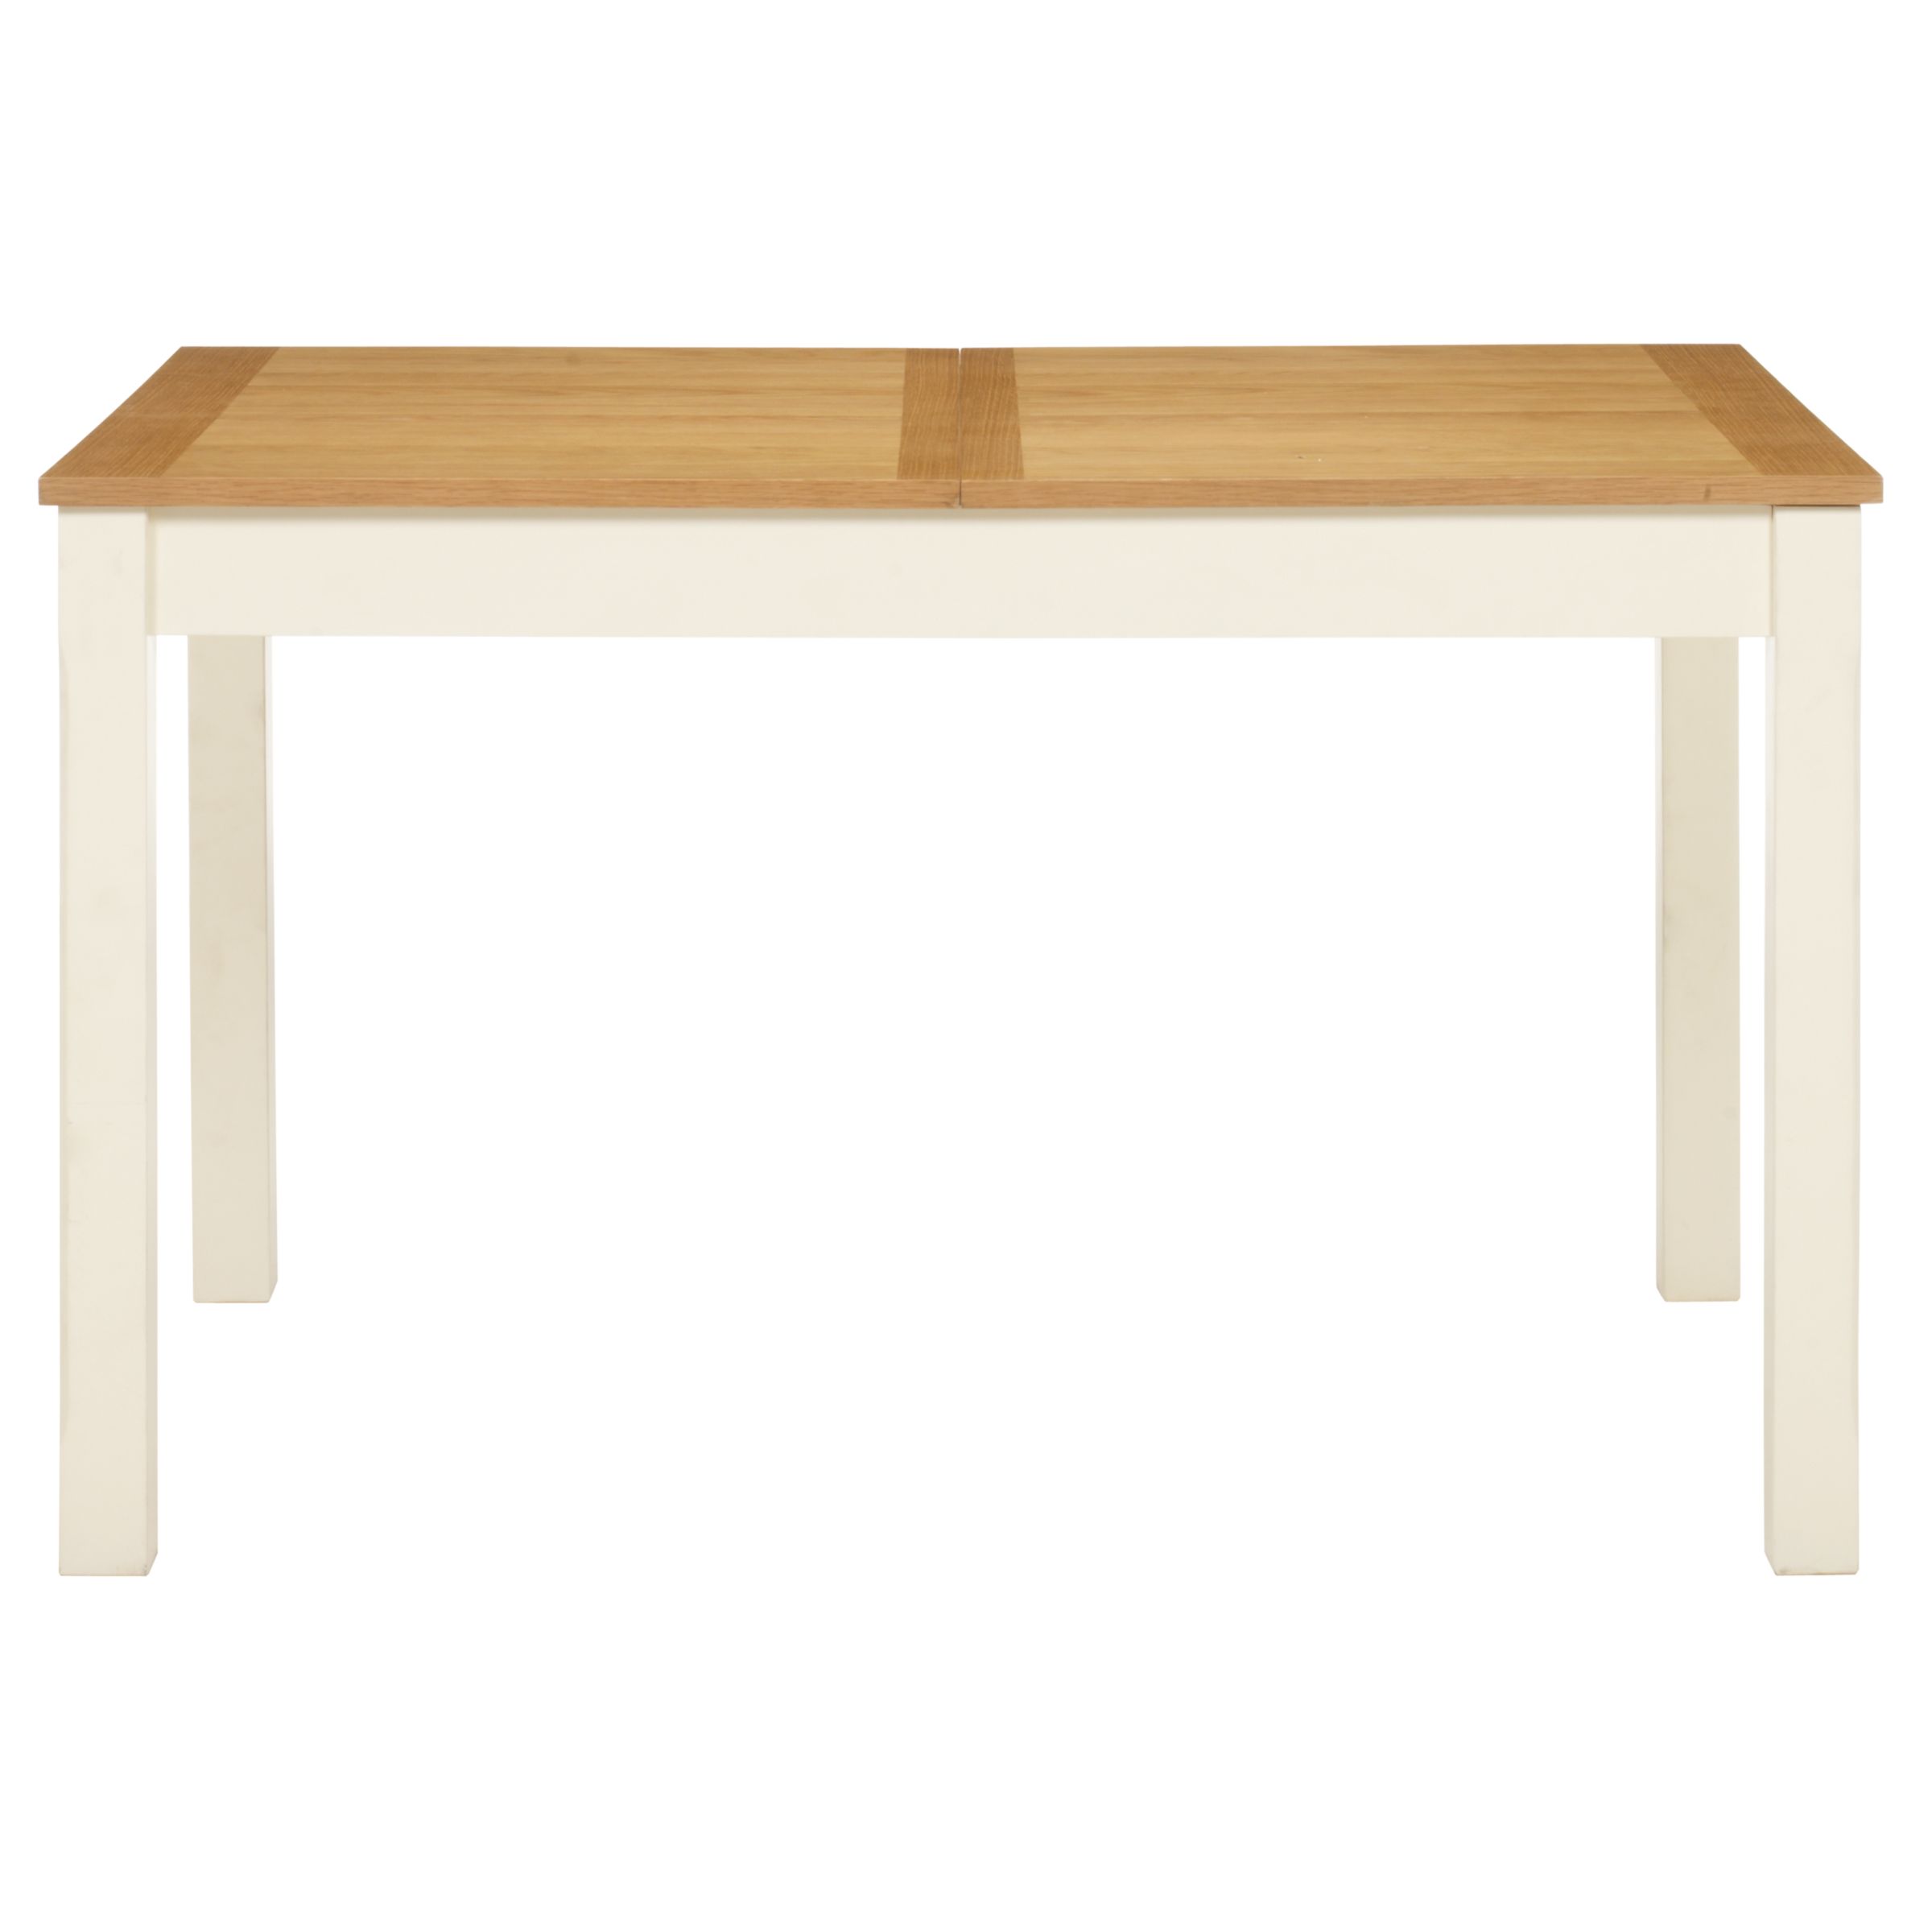 Pemberley Extending Dining Table, White/Natural